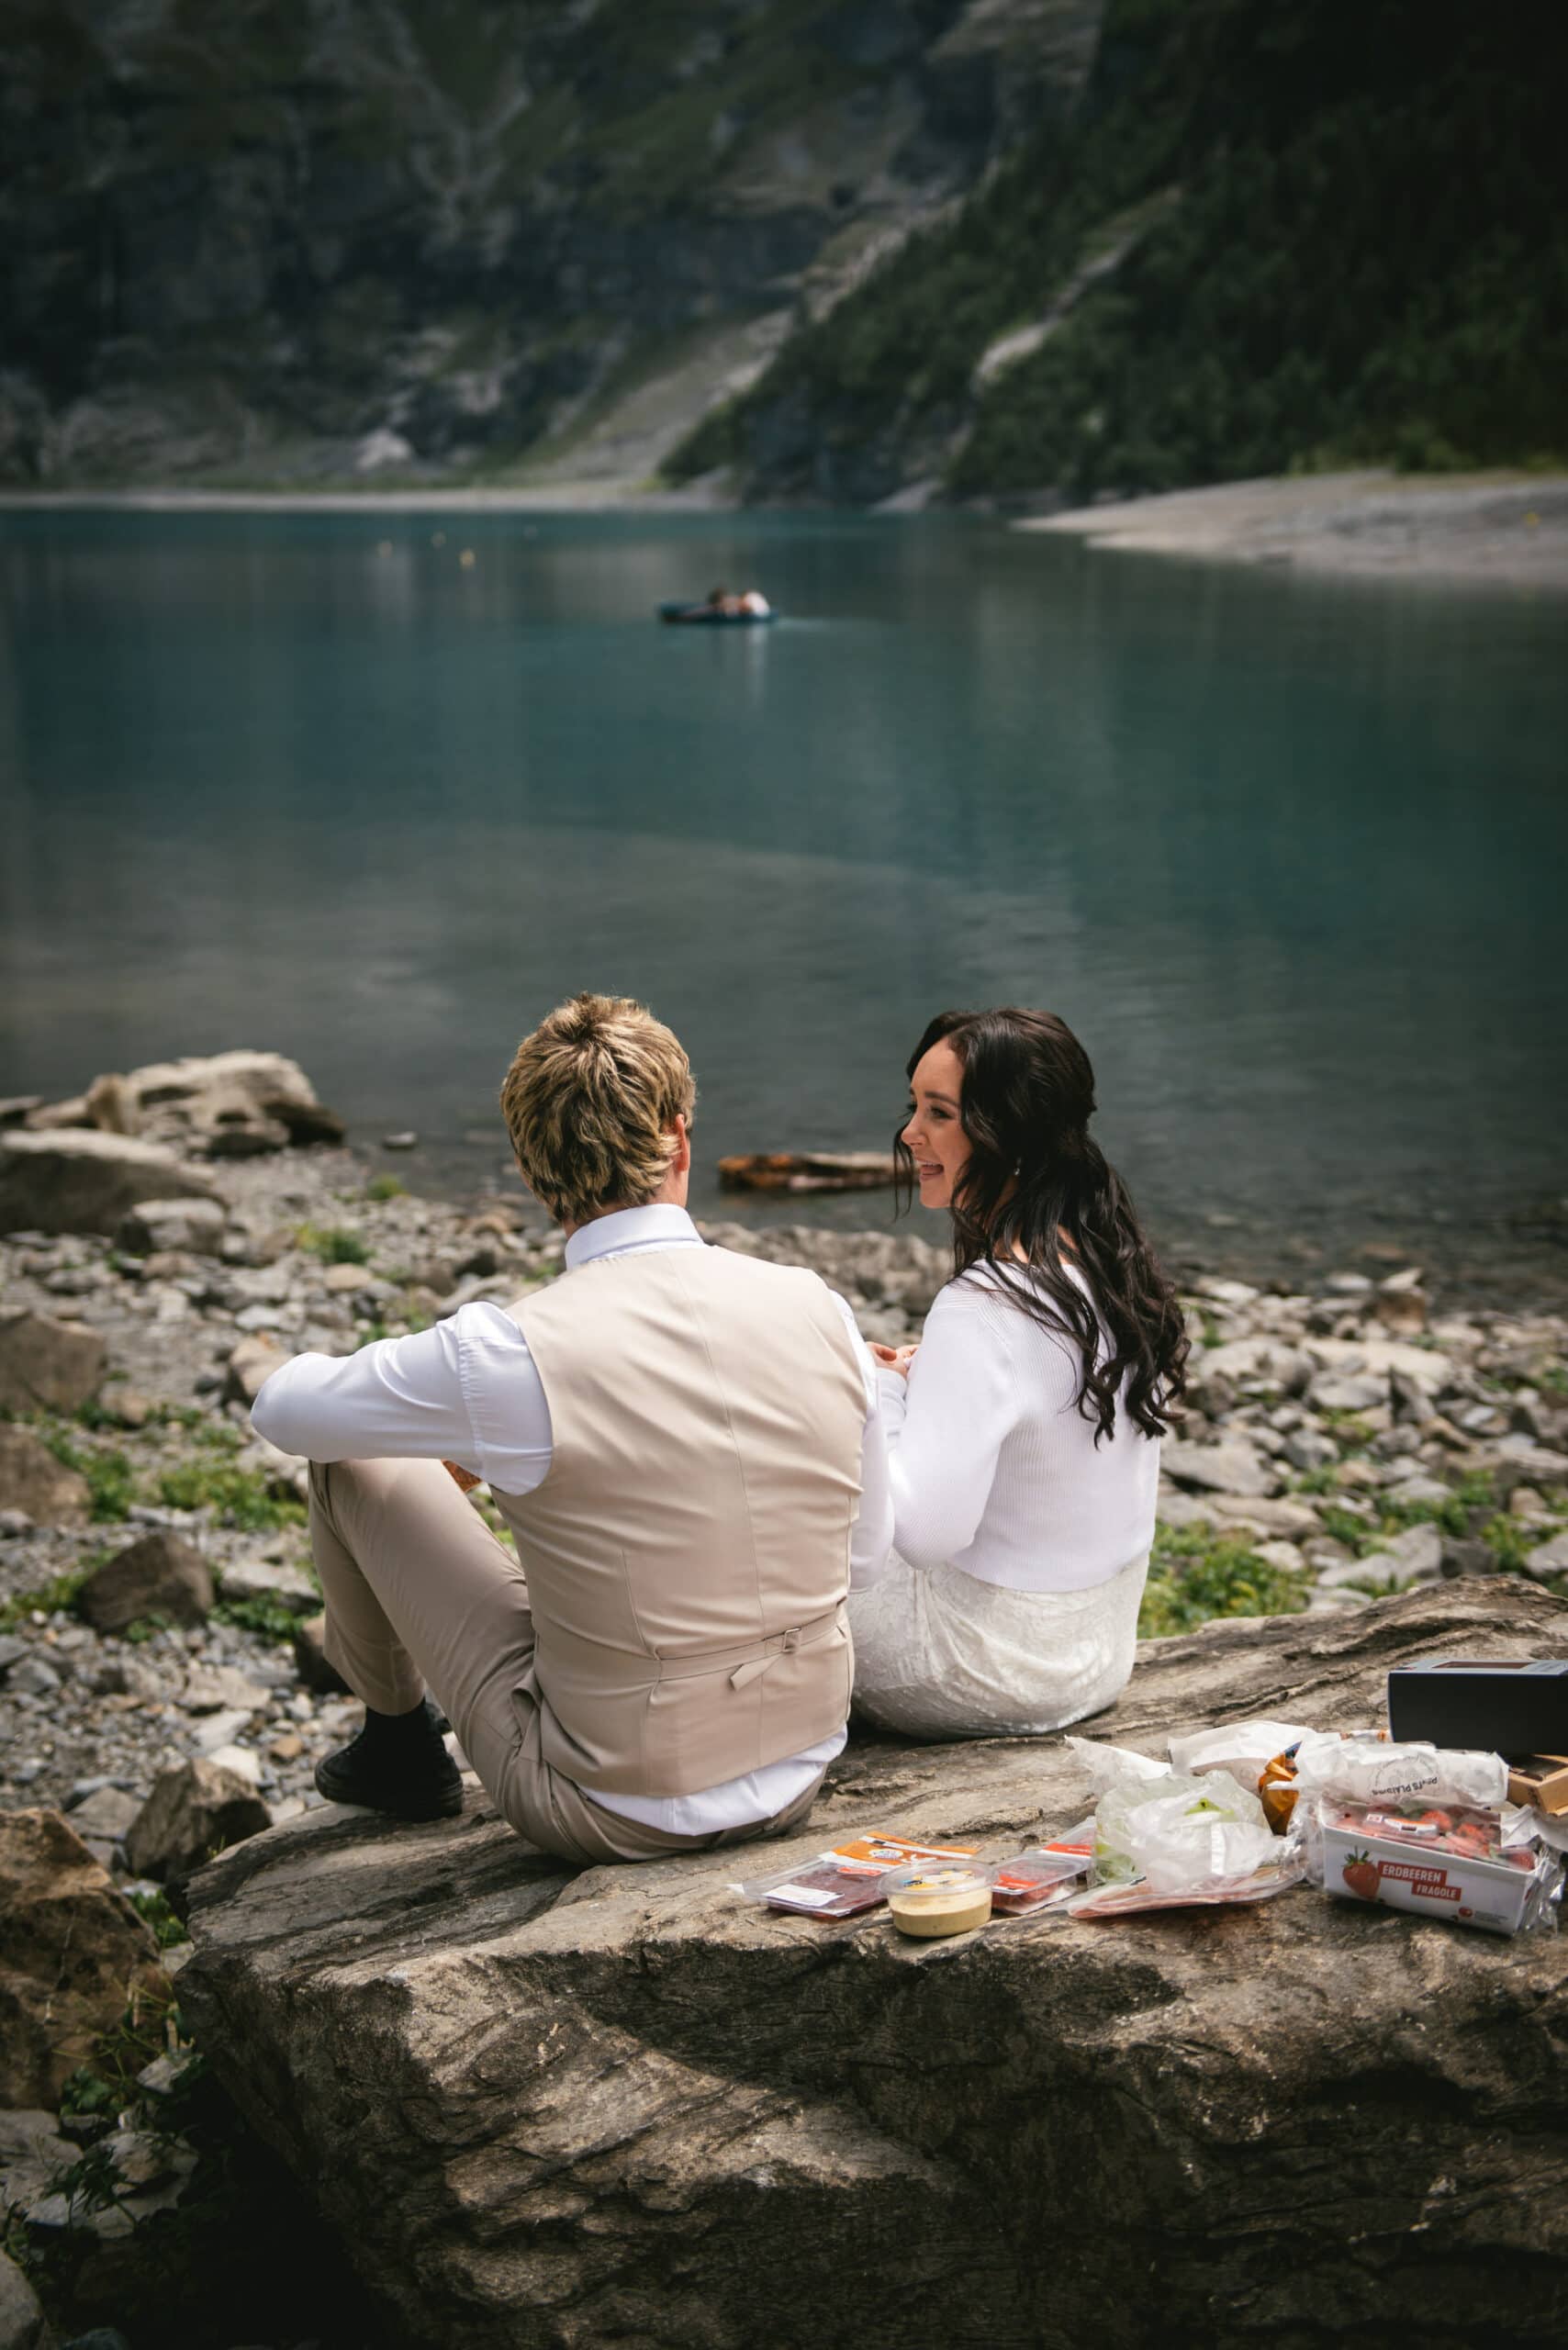 Love's journey painted with Swiss landscapes - Emily & Luke's hiking elopement.